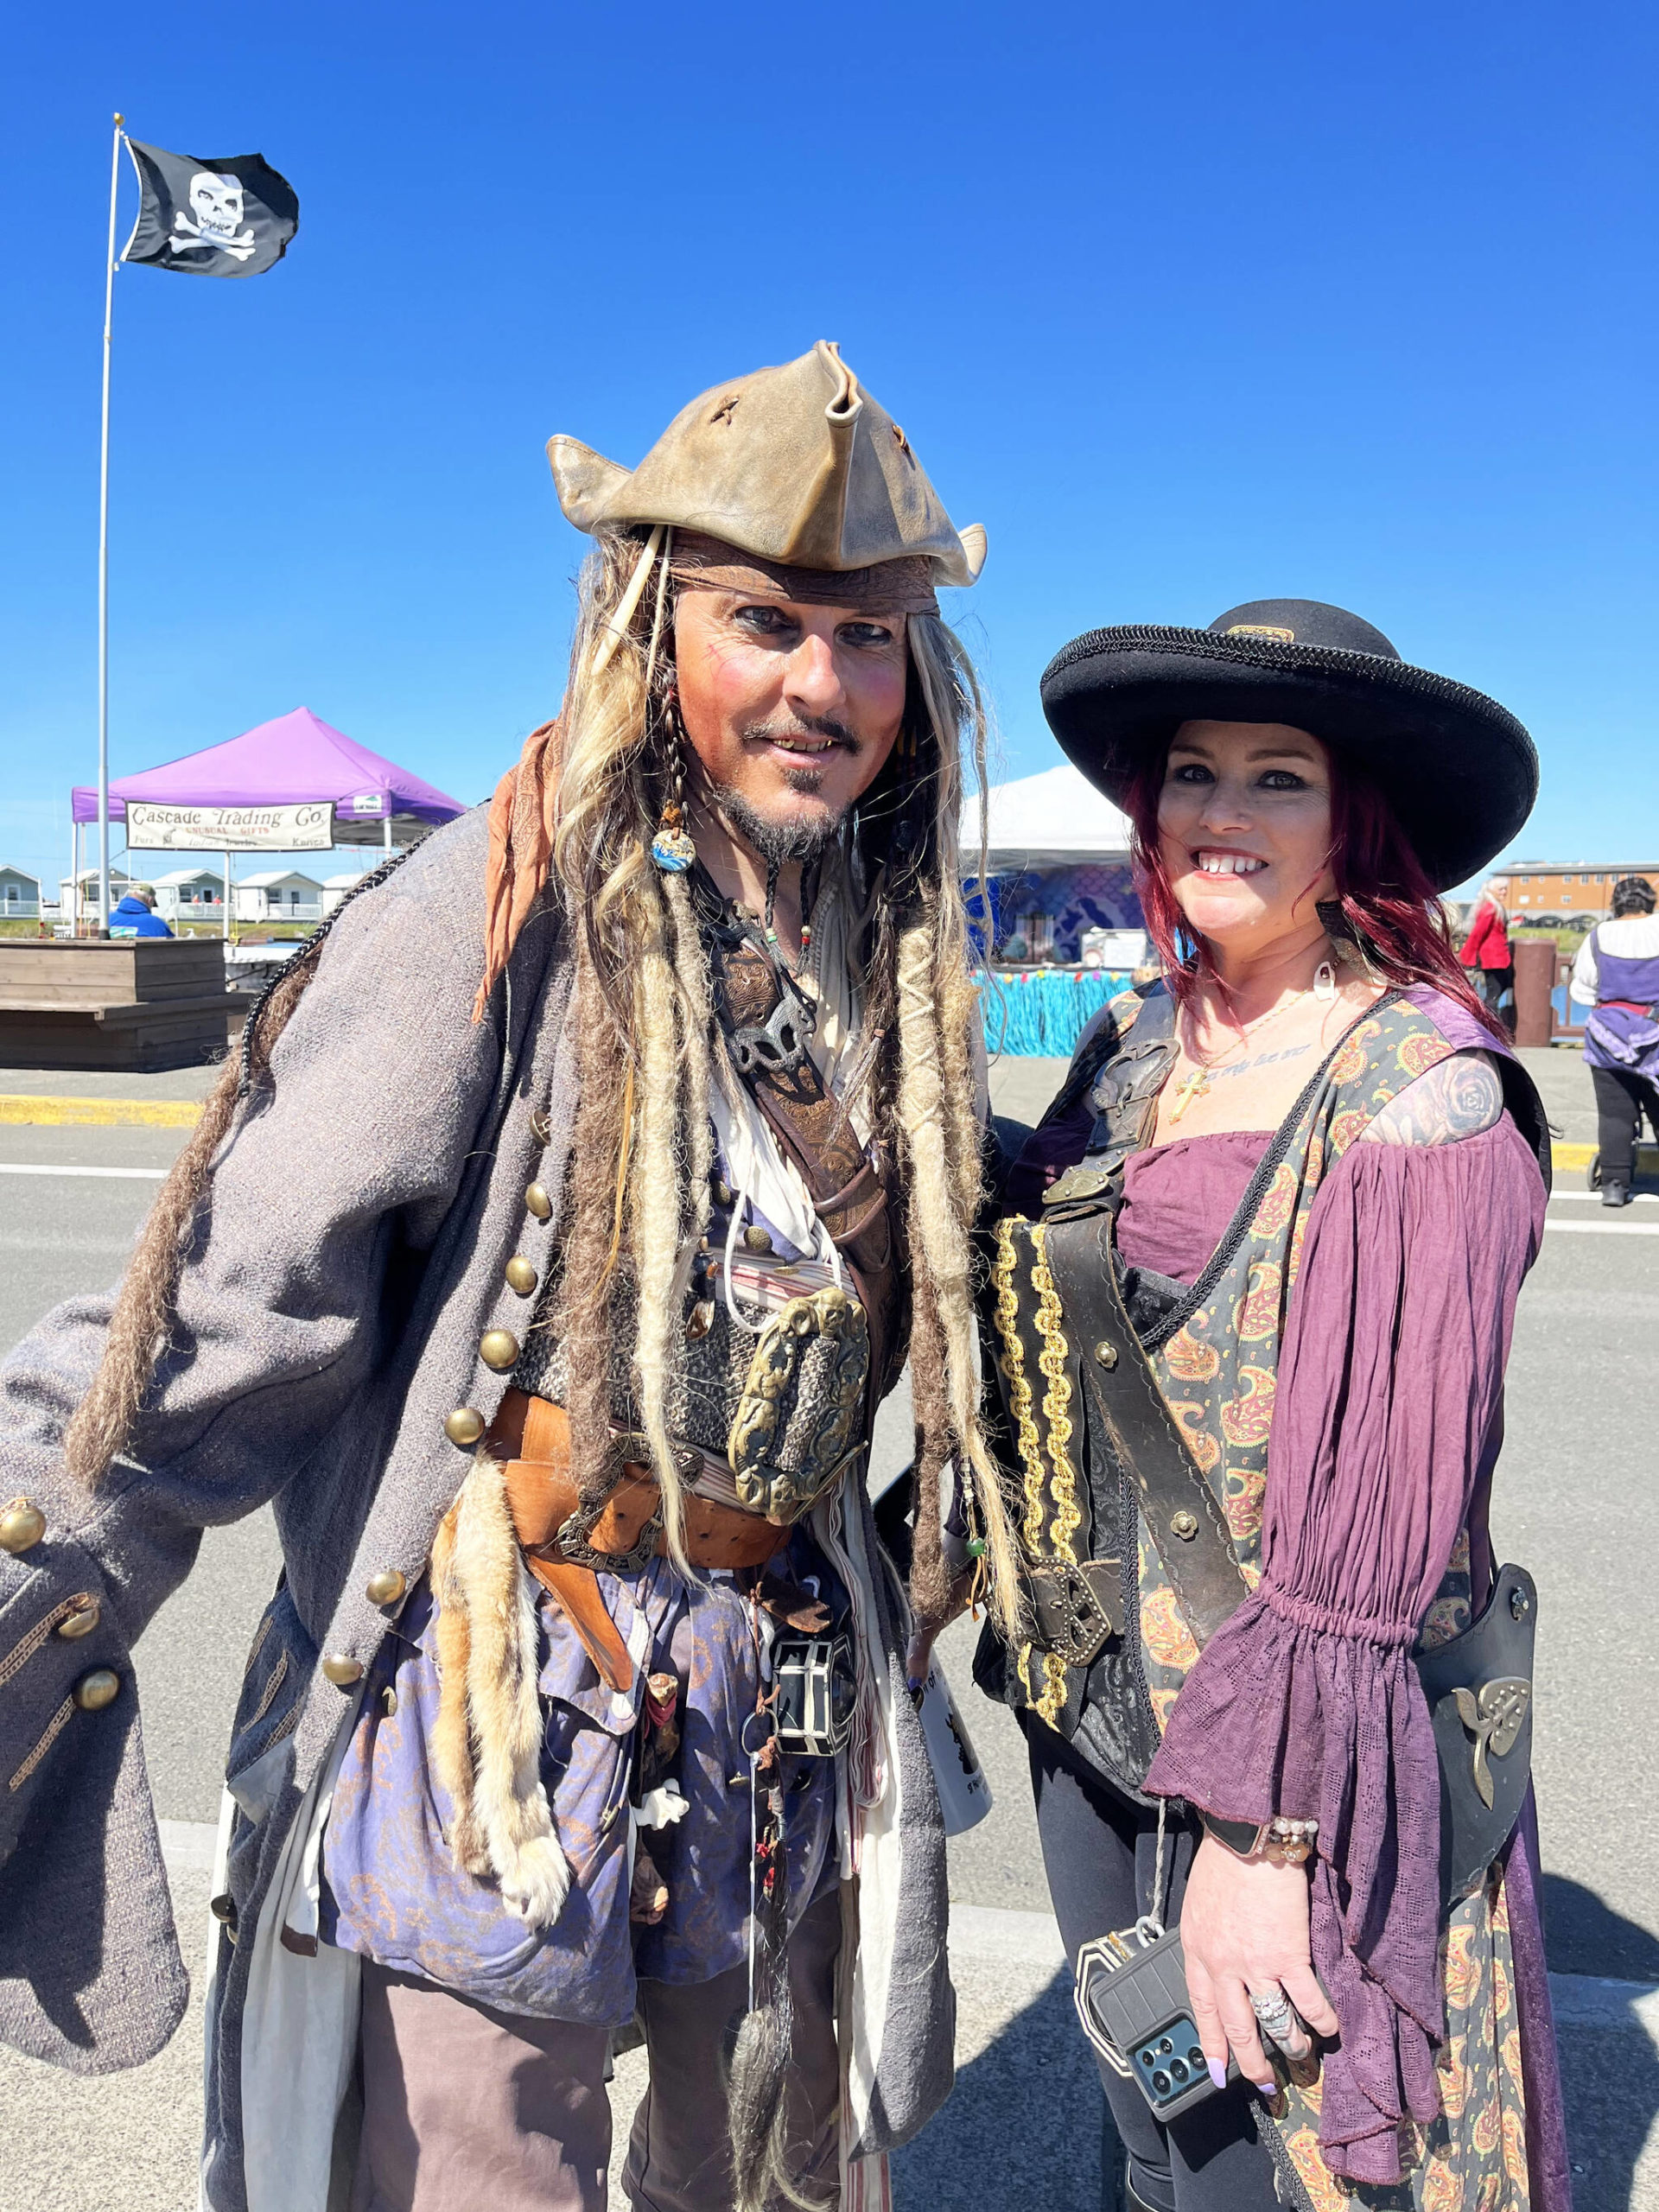 Walk a plank of fun in Westport The Daily World